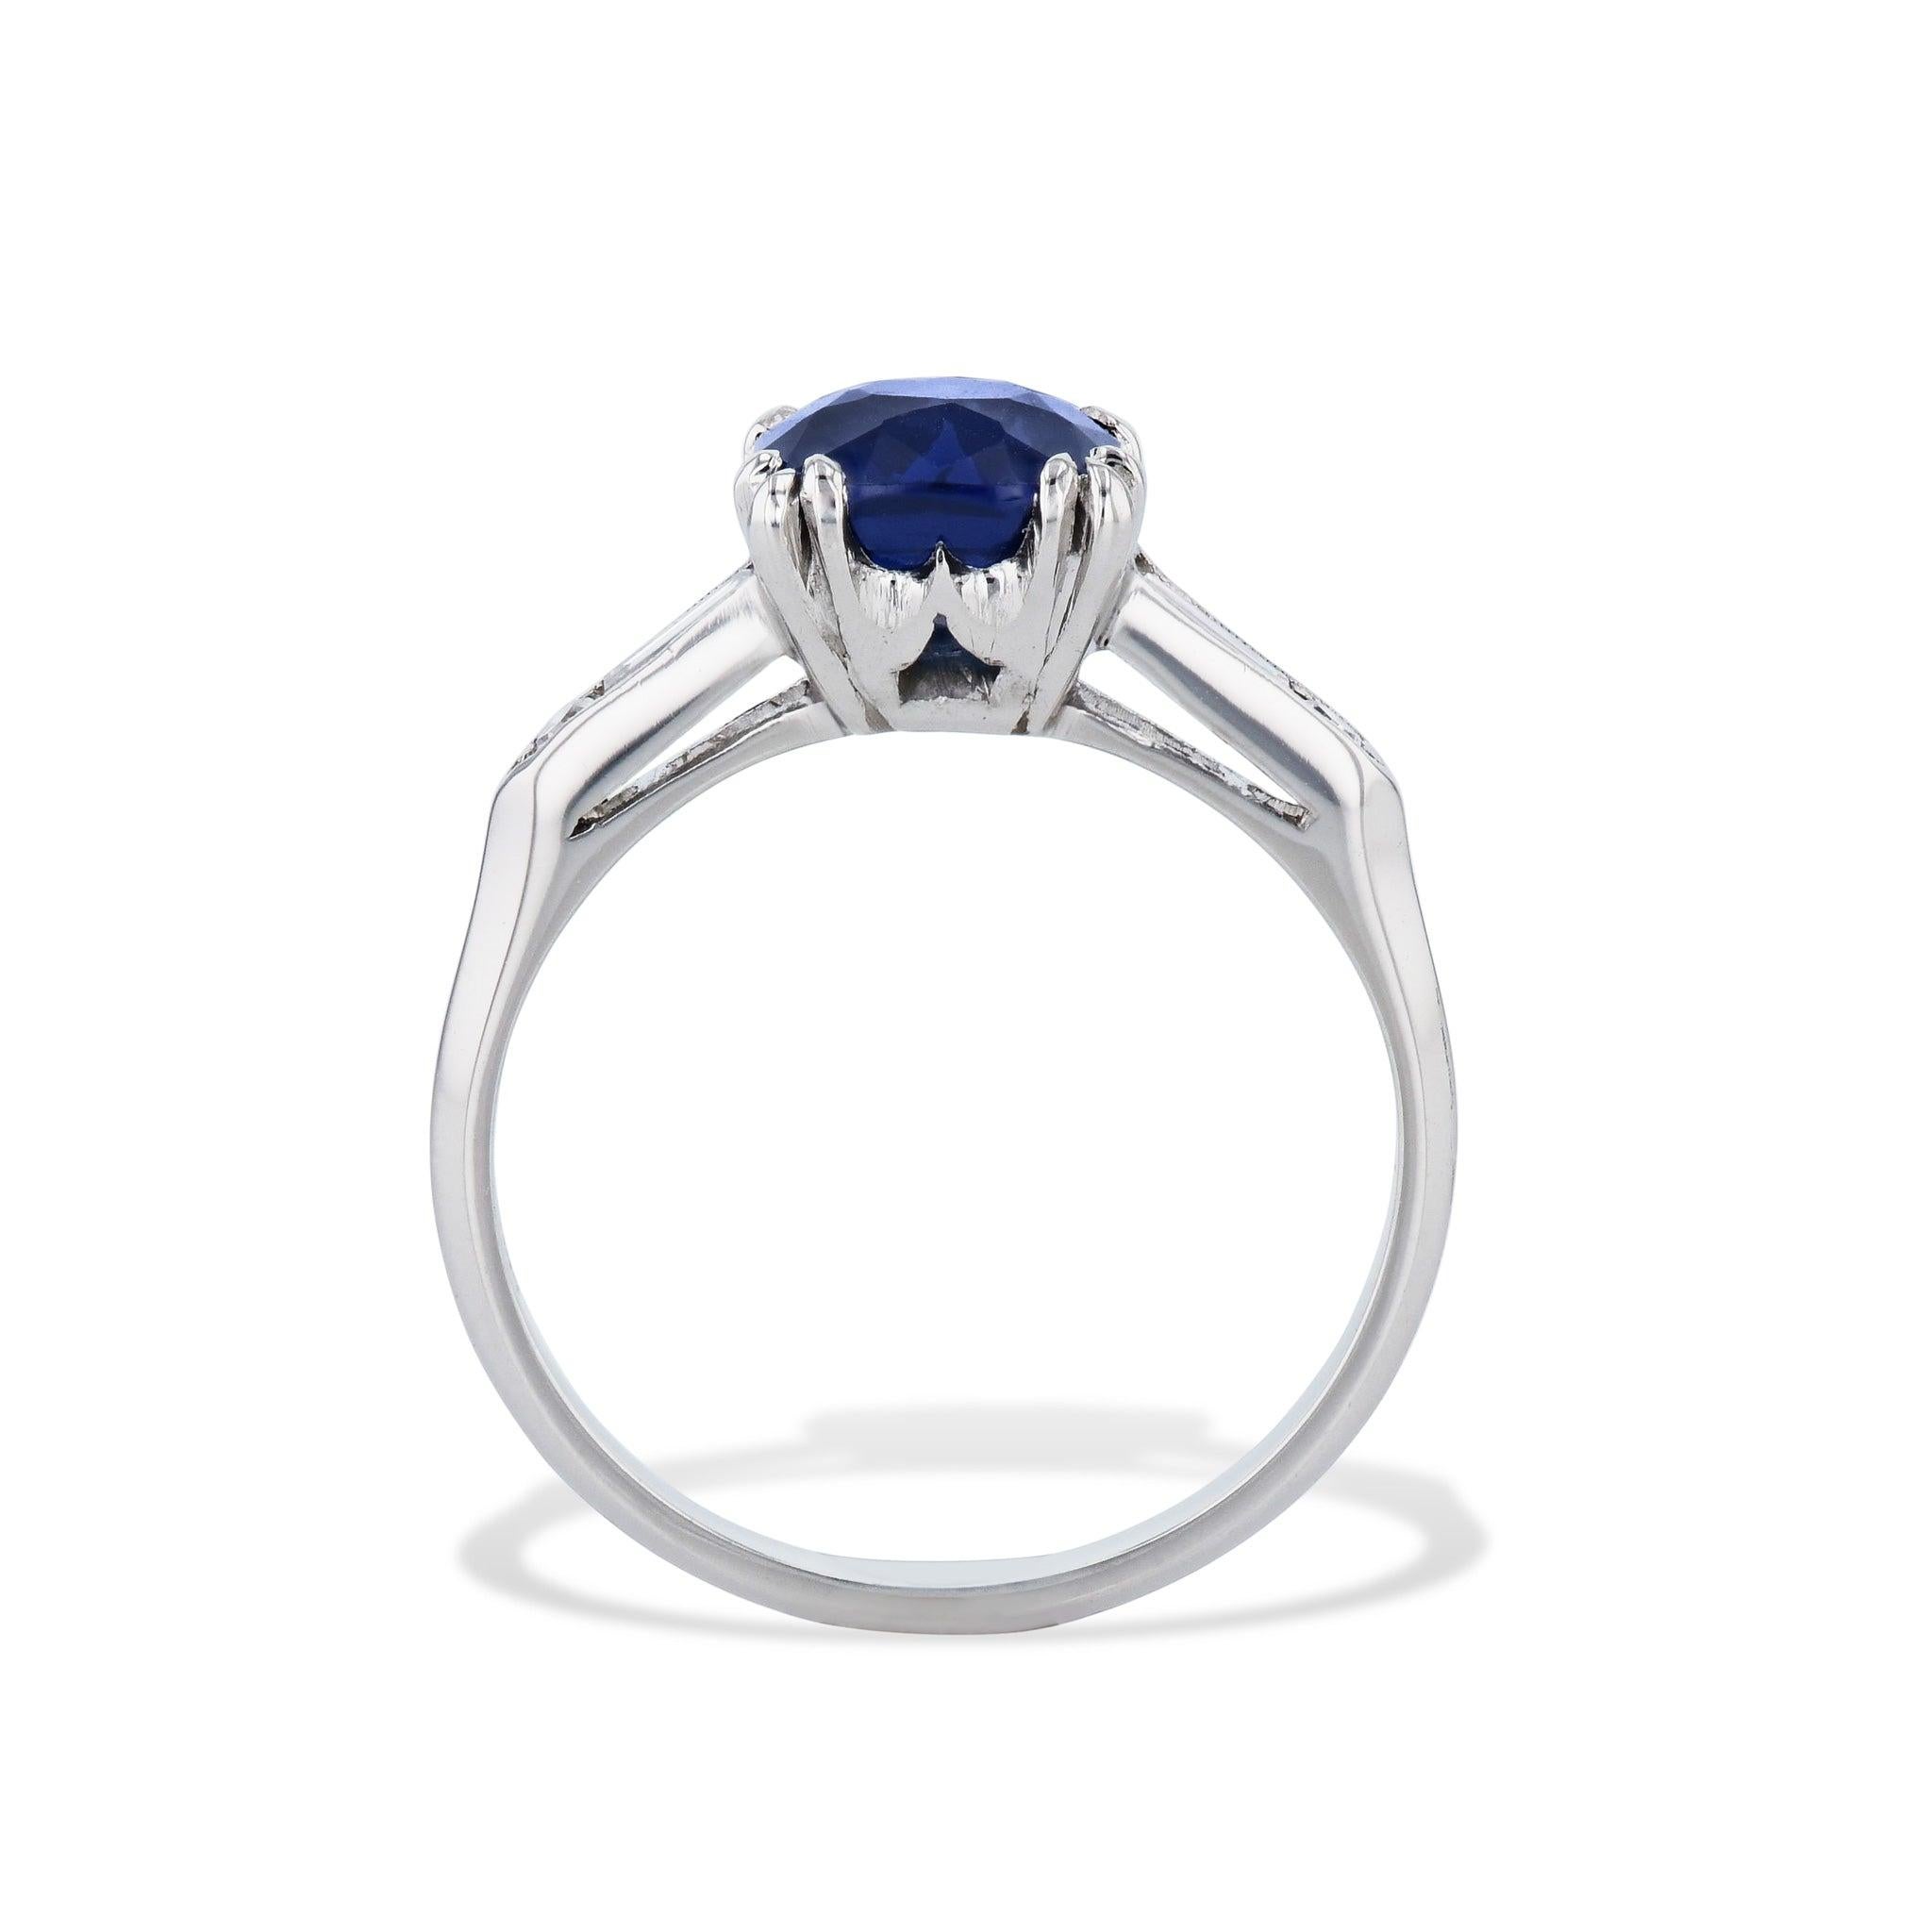 
This exquisite Cushion Cut Blue Sapphire and Diamond Platinum Ring is absolutely stunning. It is  from the 1940's and features a cushion cut, unheated Blue Sapphire with diamond baguettes on each side.

It is crafted in platinum.
The Blue Sapphire